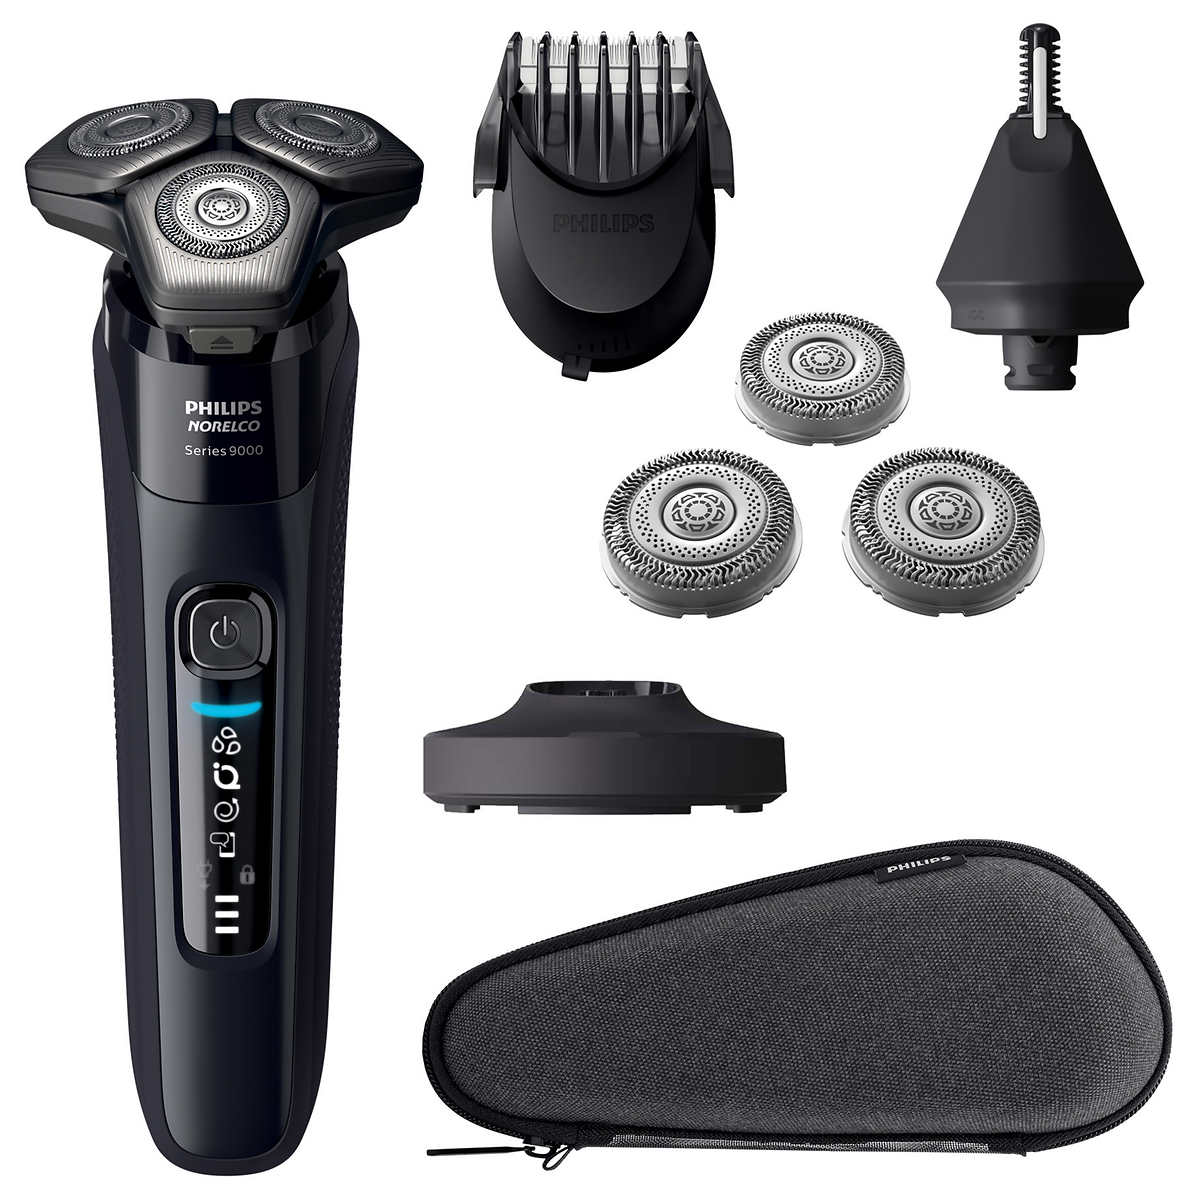 Philips Norelco Prestige Shaver with Qi Charging and Quick Cleaning Pod